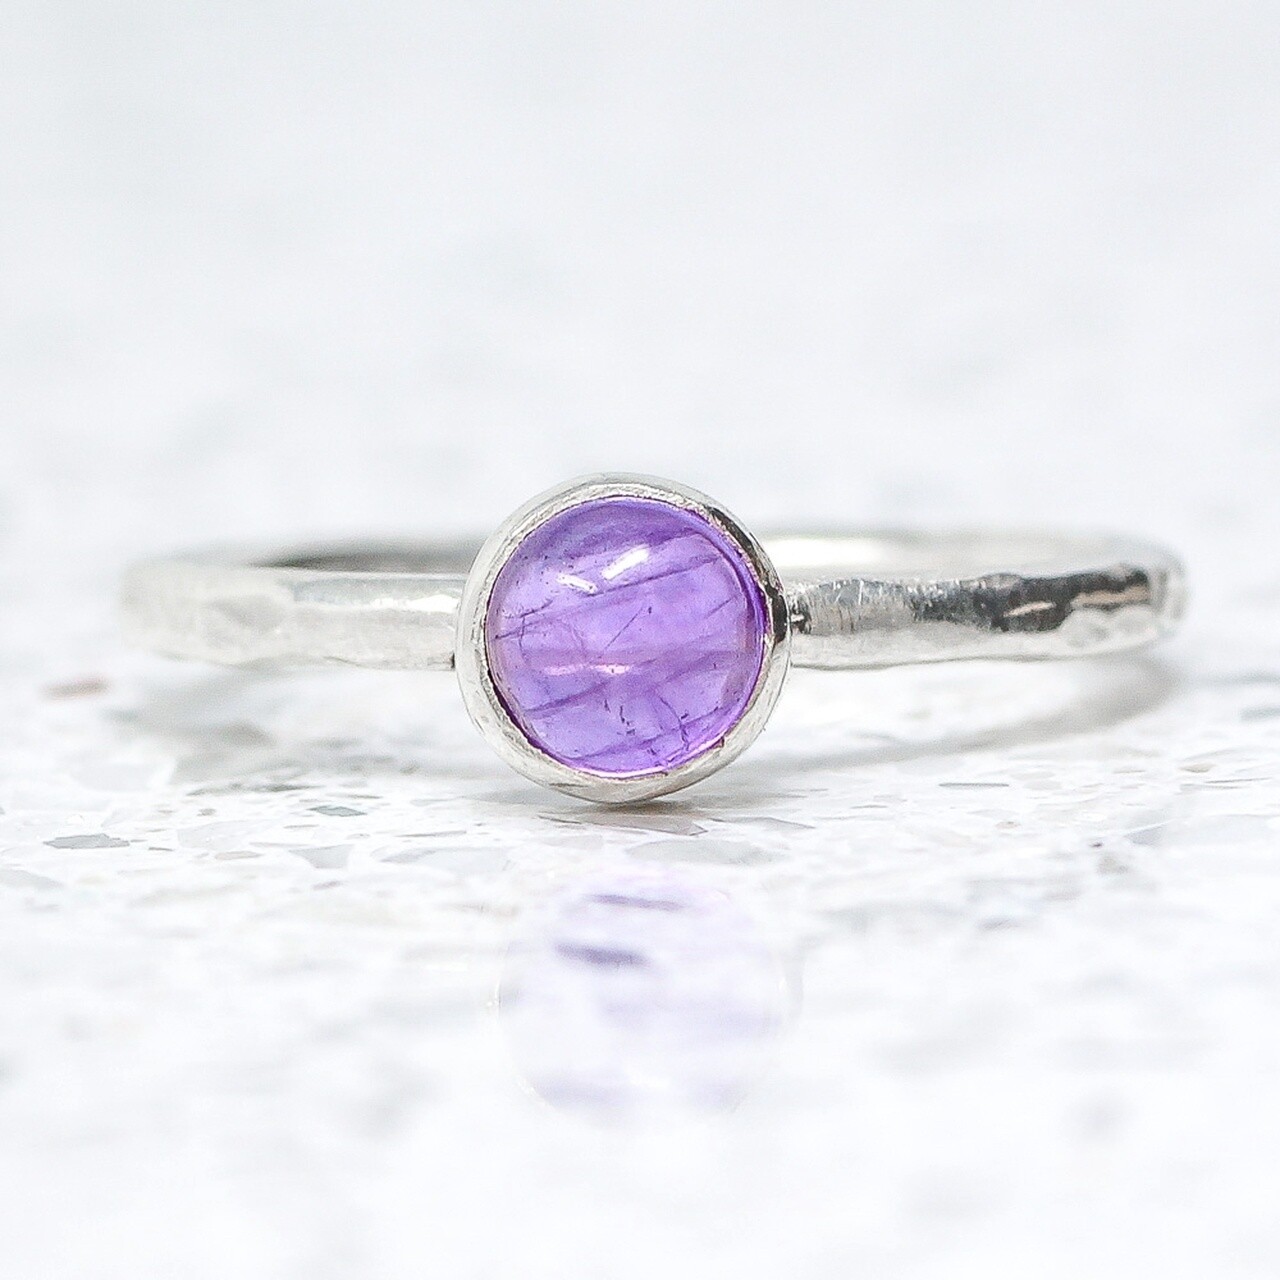 Beaten Silver Ring With Amethyst By Fi Mehra